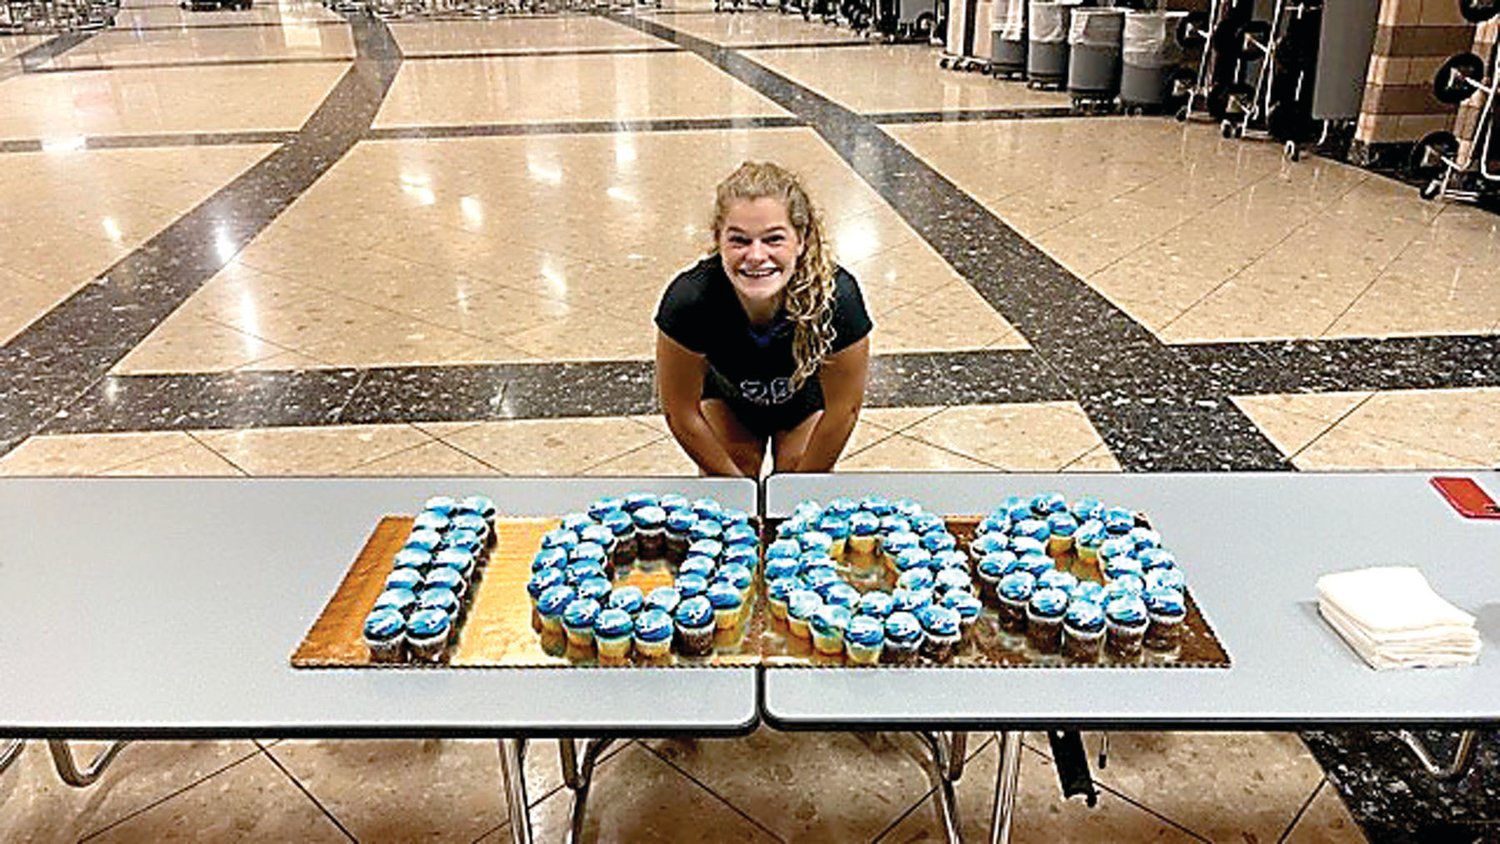 CB South girls volleyball senior captain Millie Grove celebrates reaching 1,000 kills in her career with cupcakes.